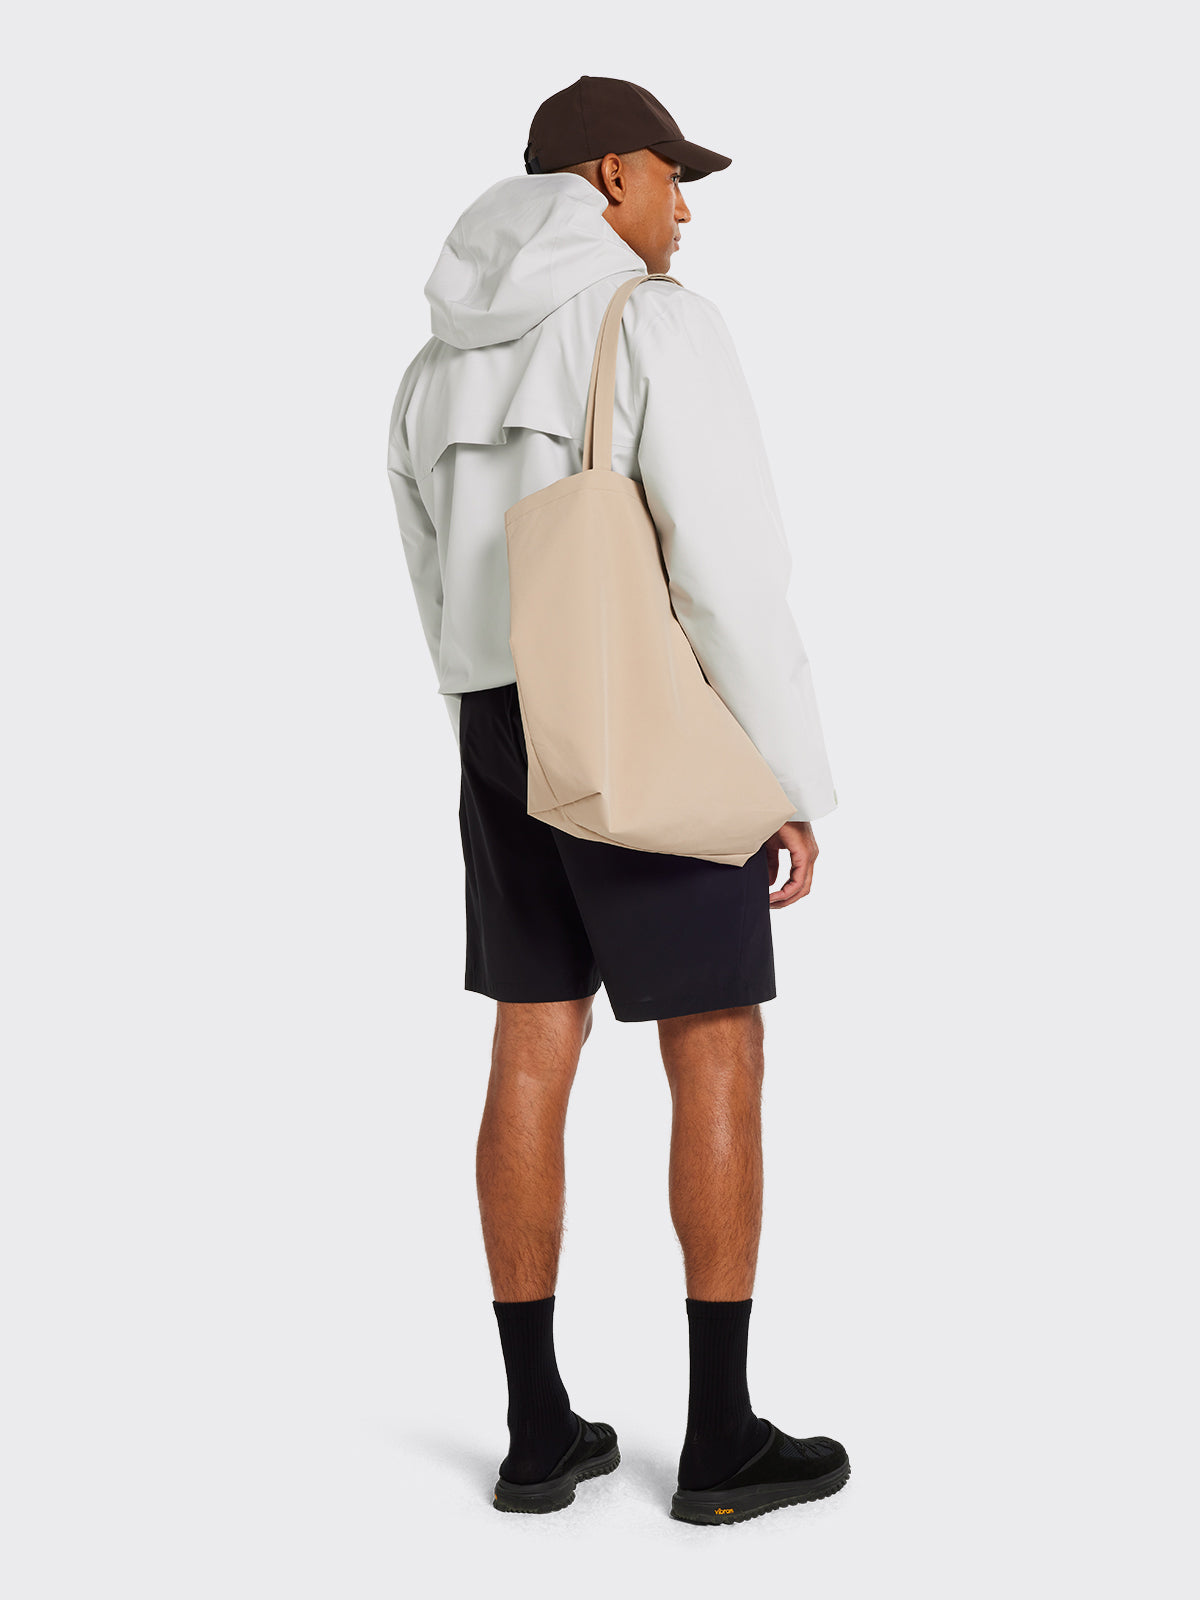 Man wearing in Stette jacket, Moa tote bag and shorts from Blæst